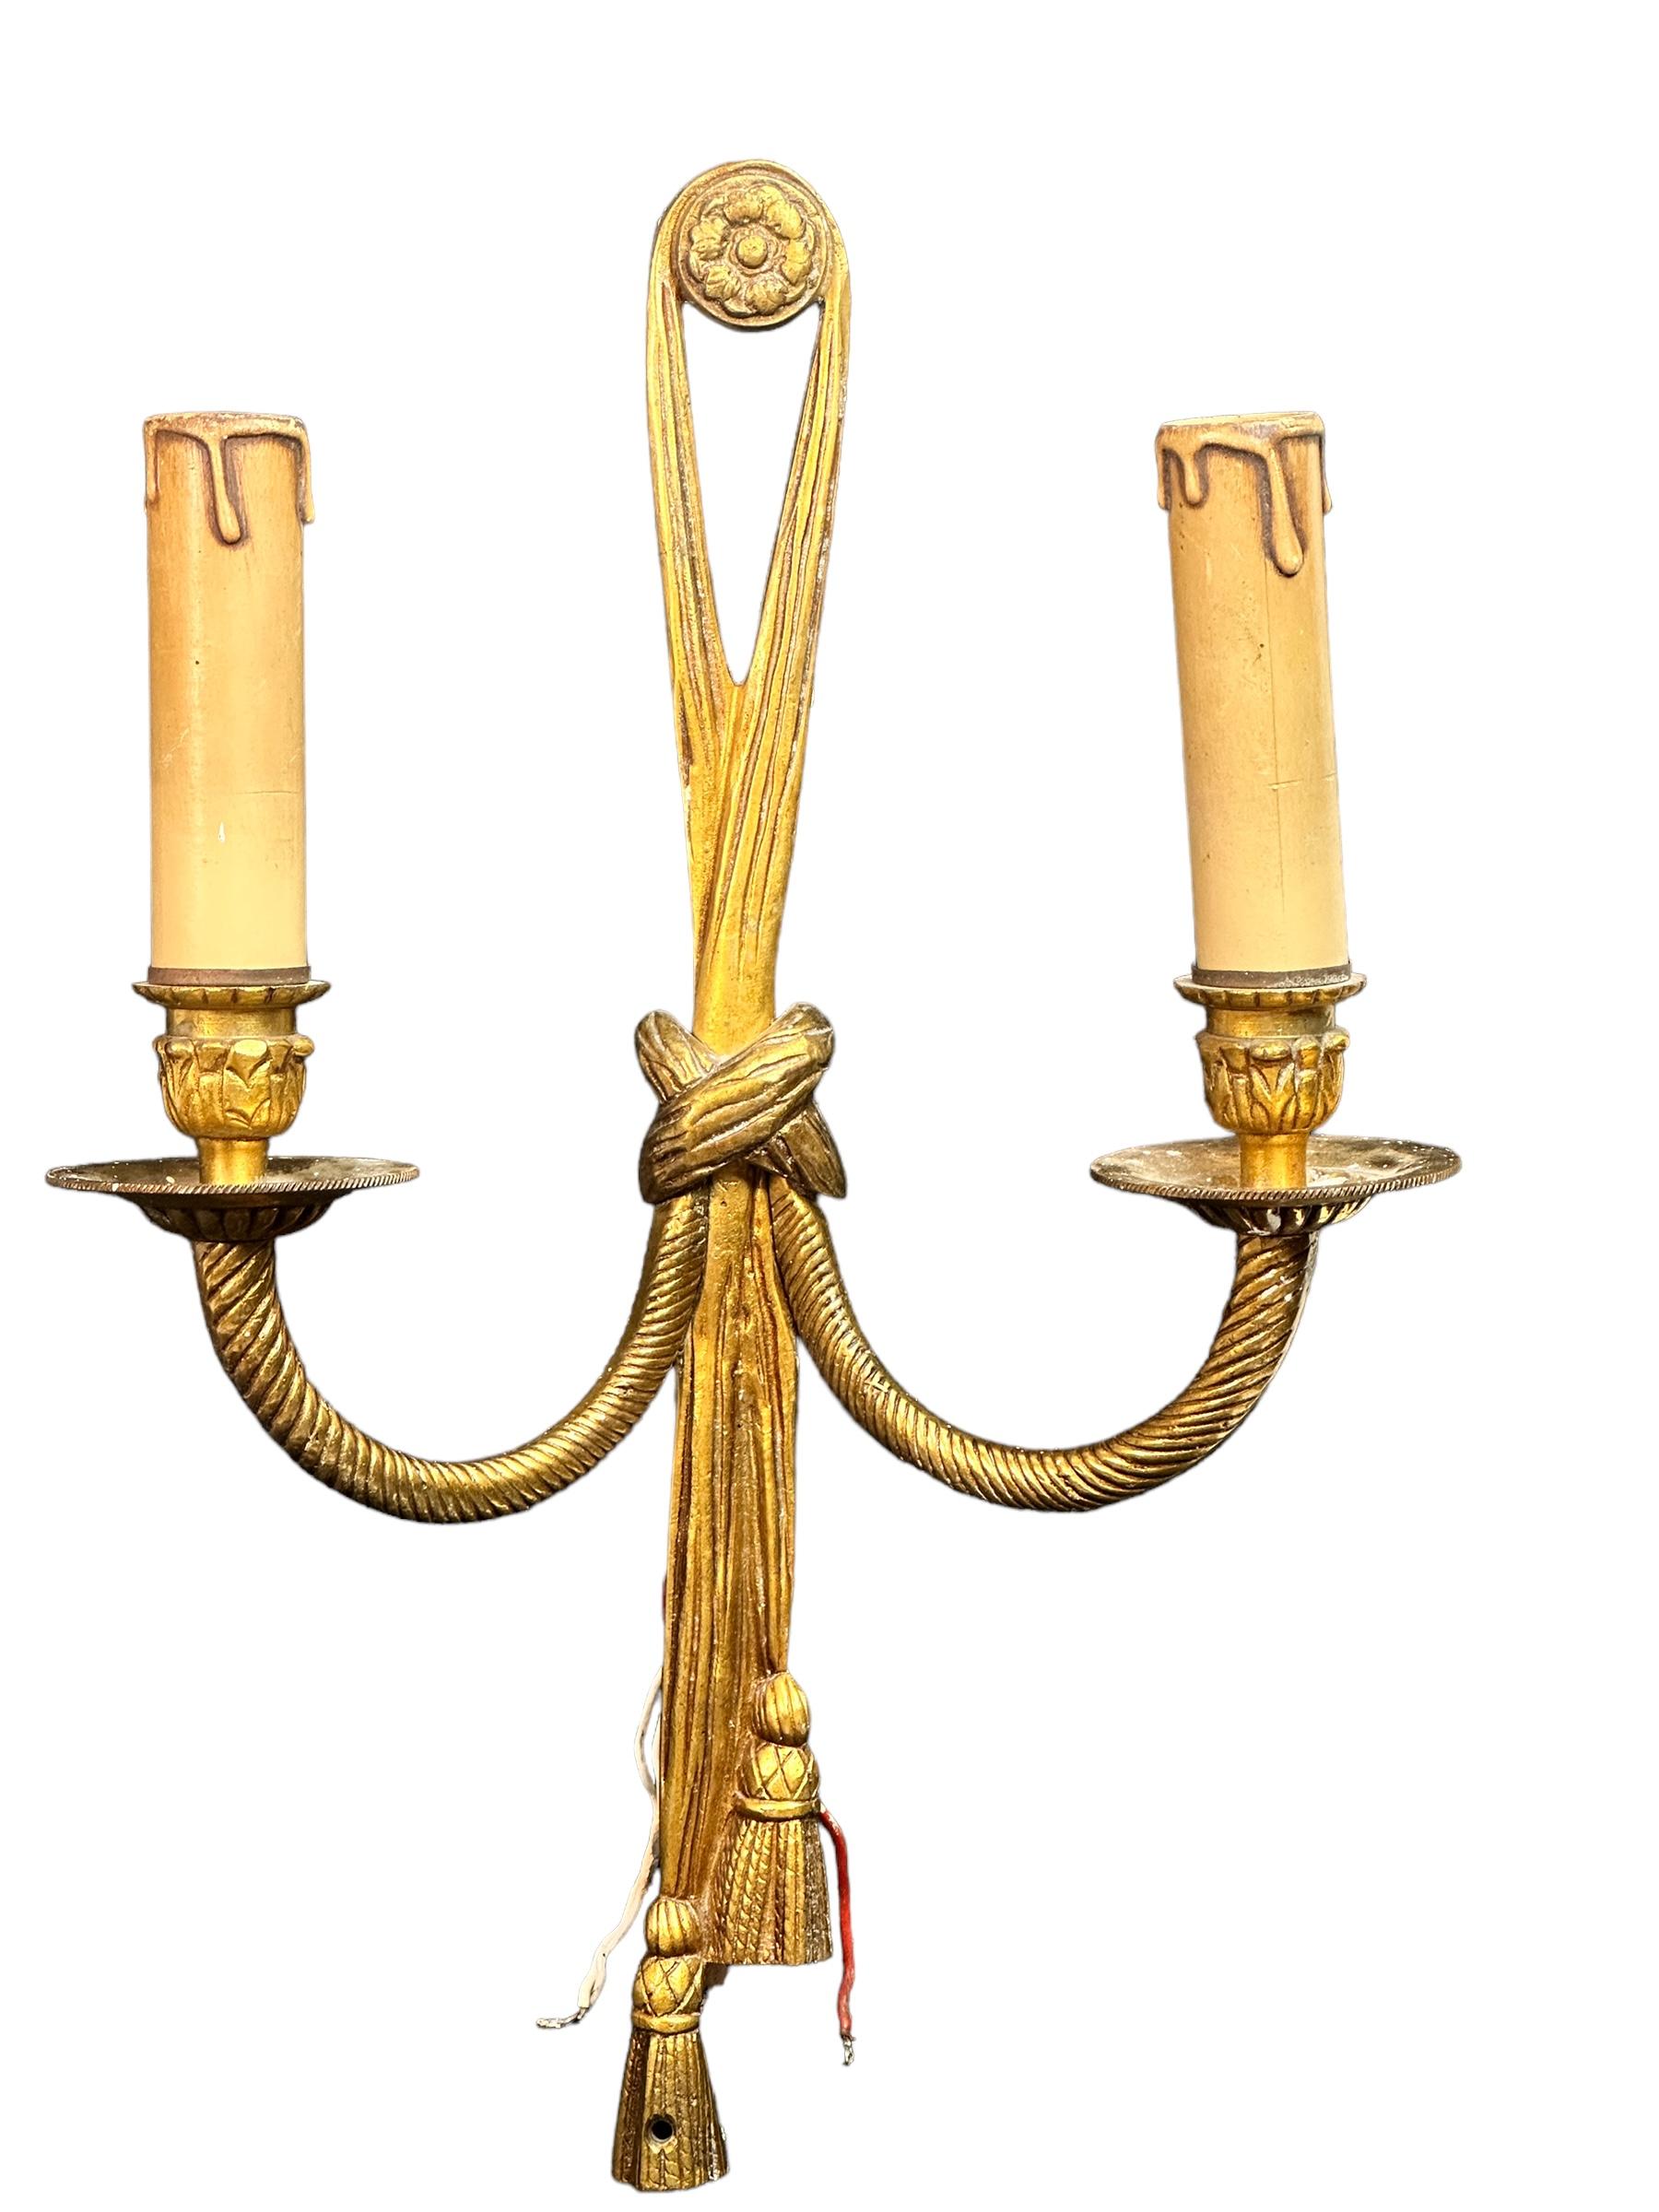 A nice sconce with 2 light sources, made of bronze with decoration of laurel branches, knot and tassels. The fixture requires two European E14 candelabra bulbs, each up to 40 watts. The wall light has a beautiful patina and gives each room an